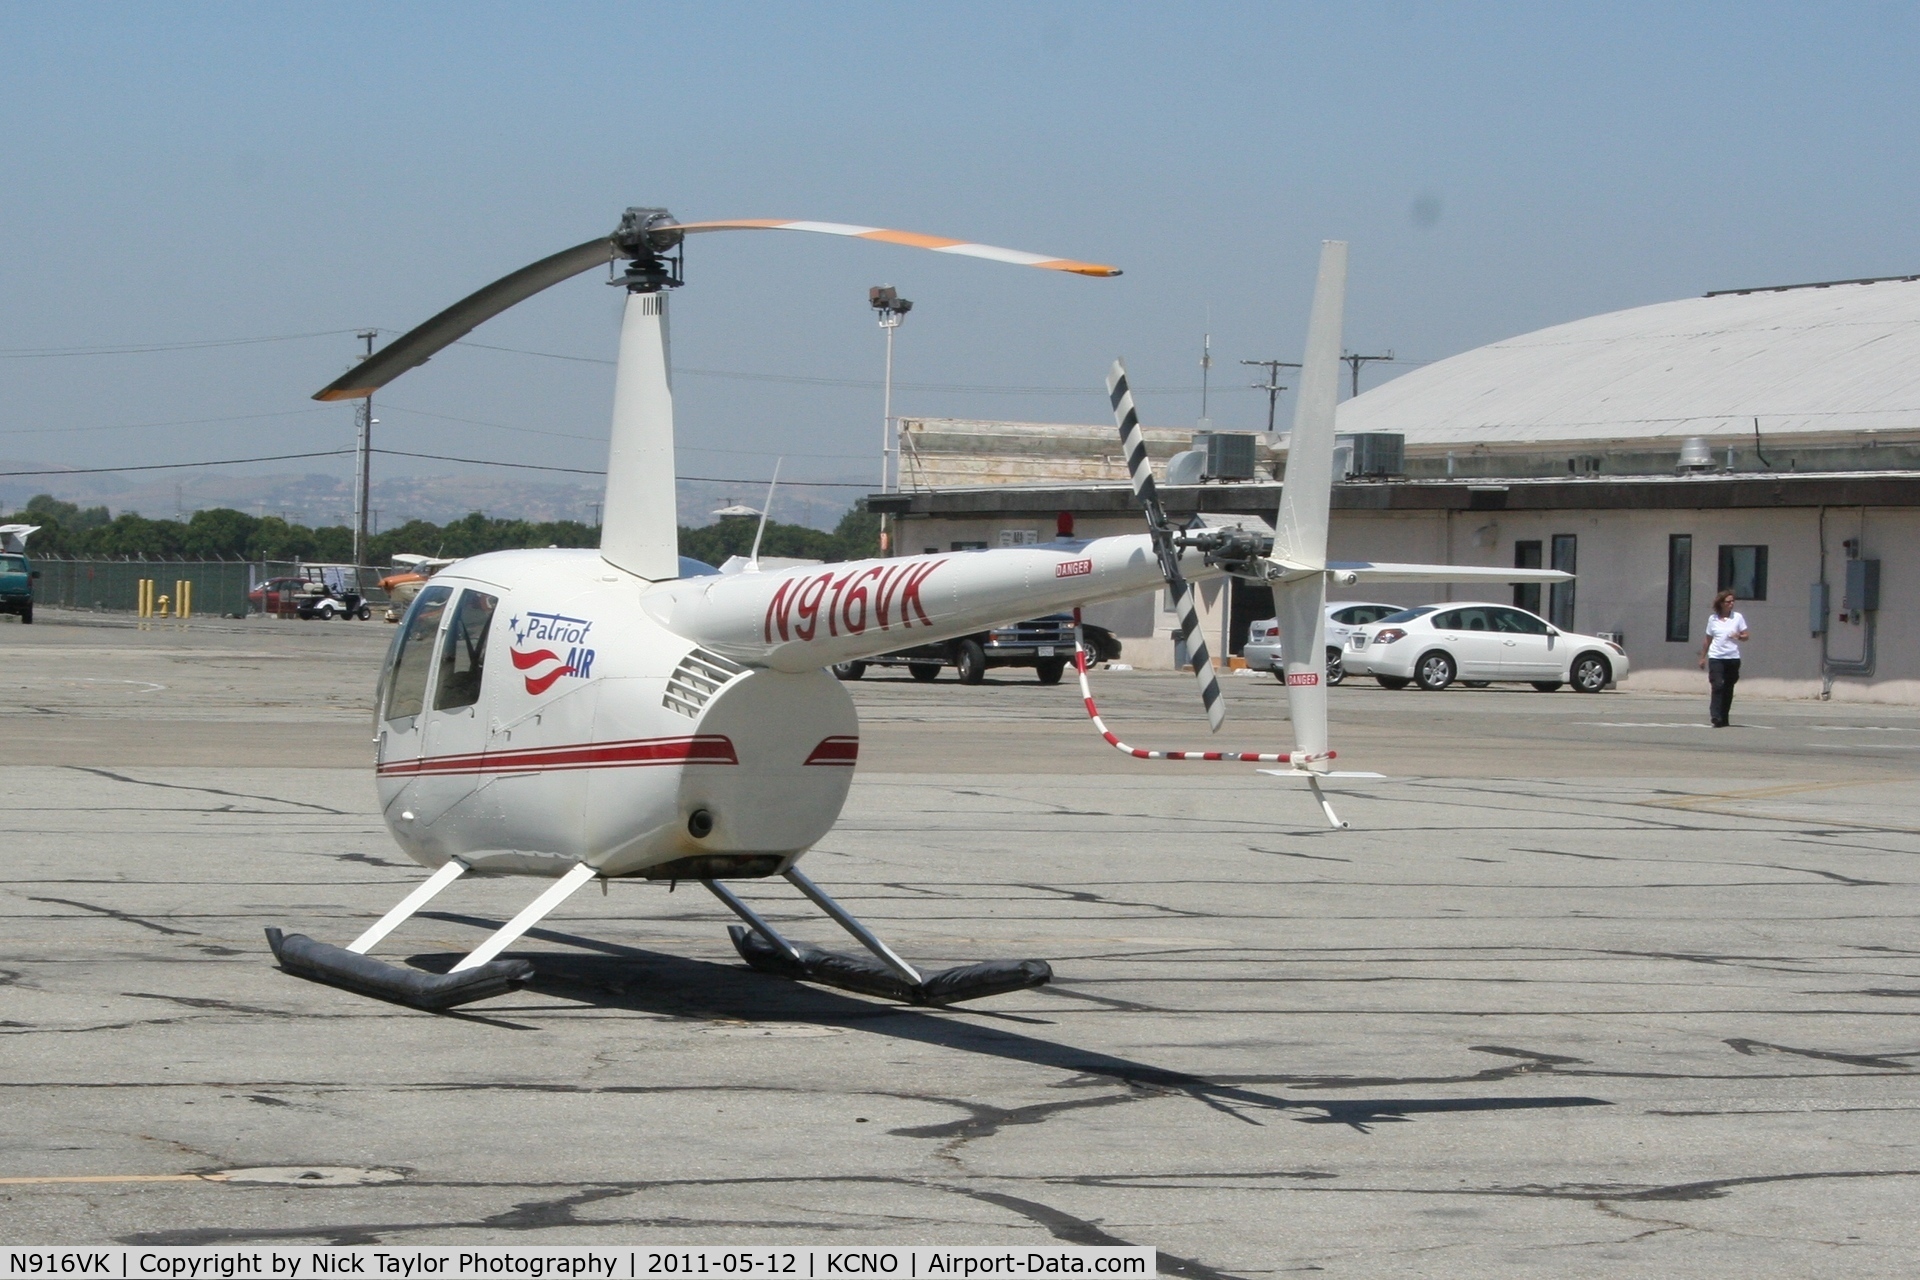 N916VK, 2006 Robinson R44 II C/N 11162, Based in Long Beach. The pilot can be seen returning to the helicopter to teach a lesson.